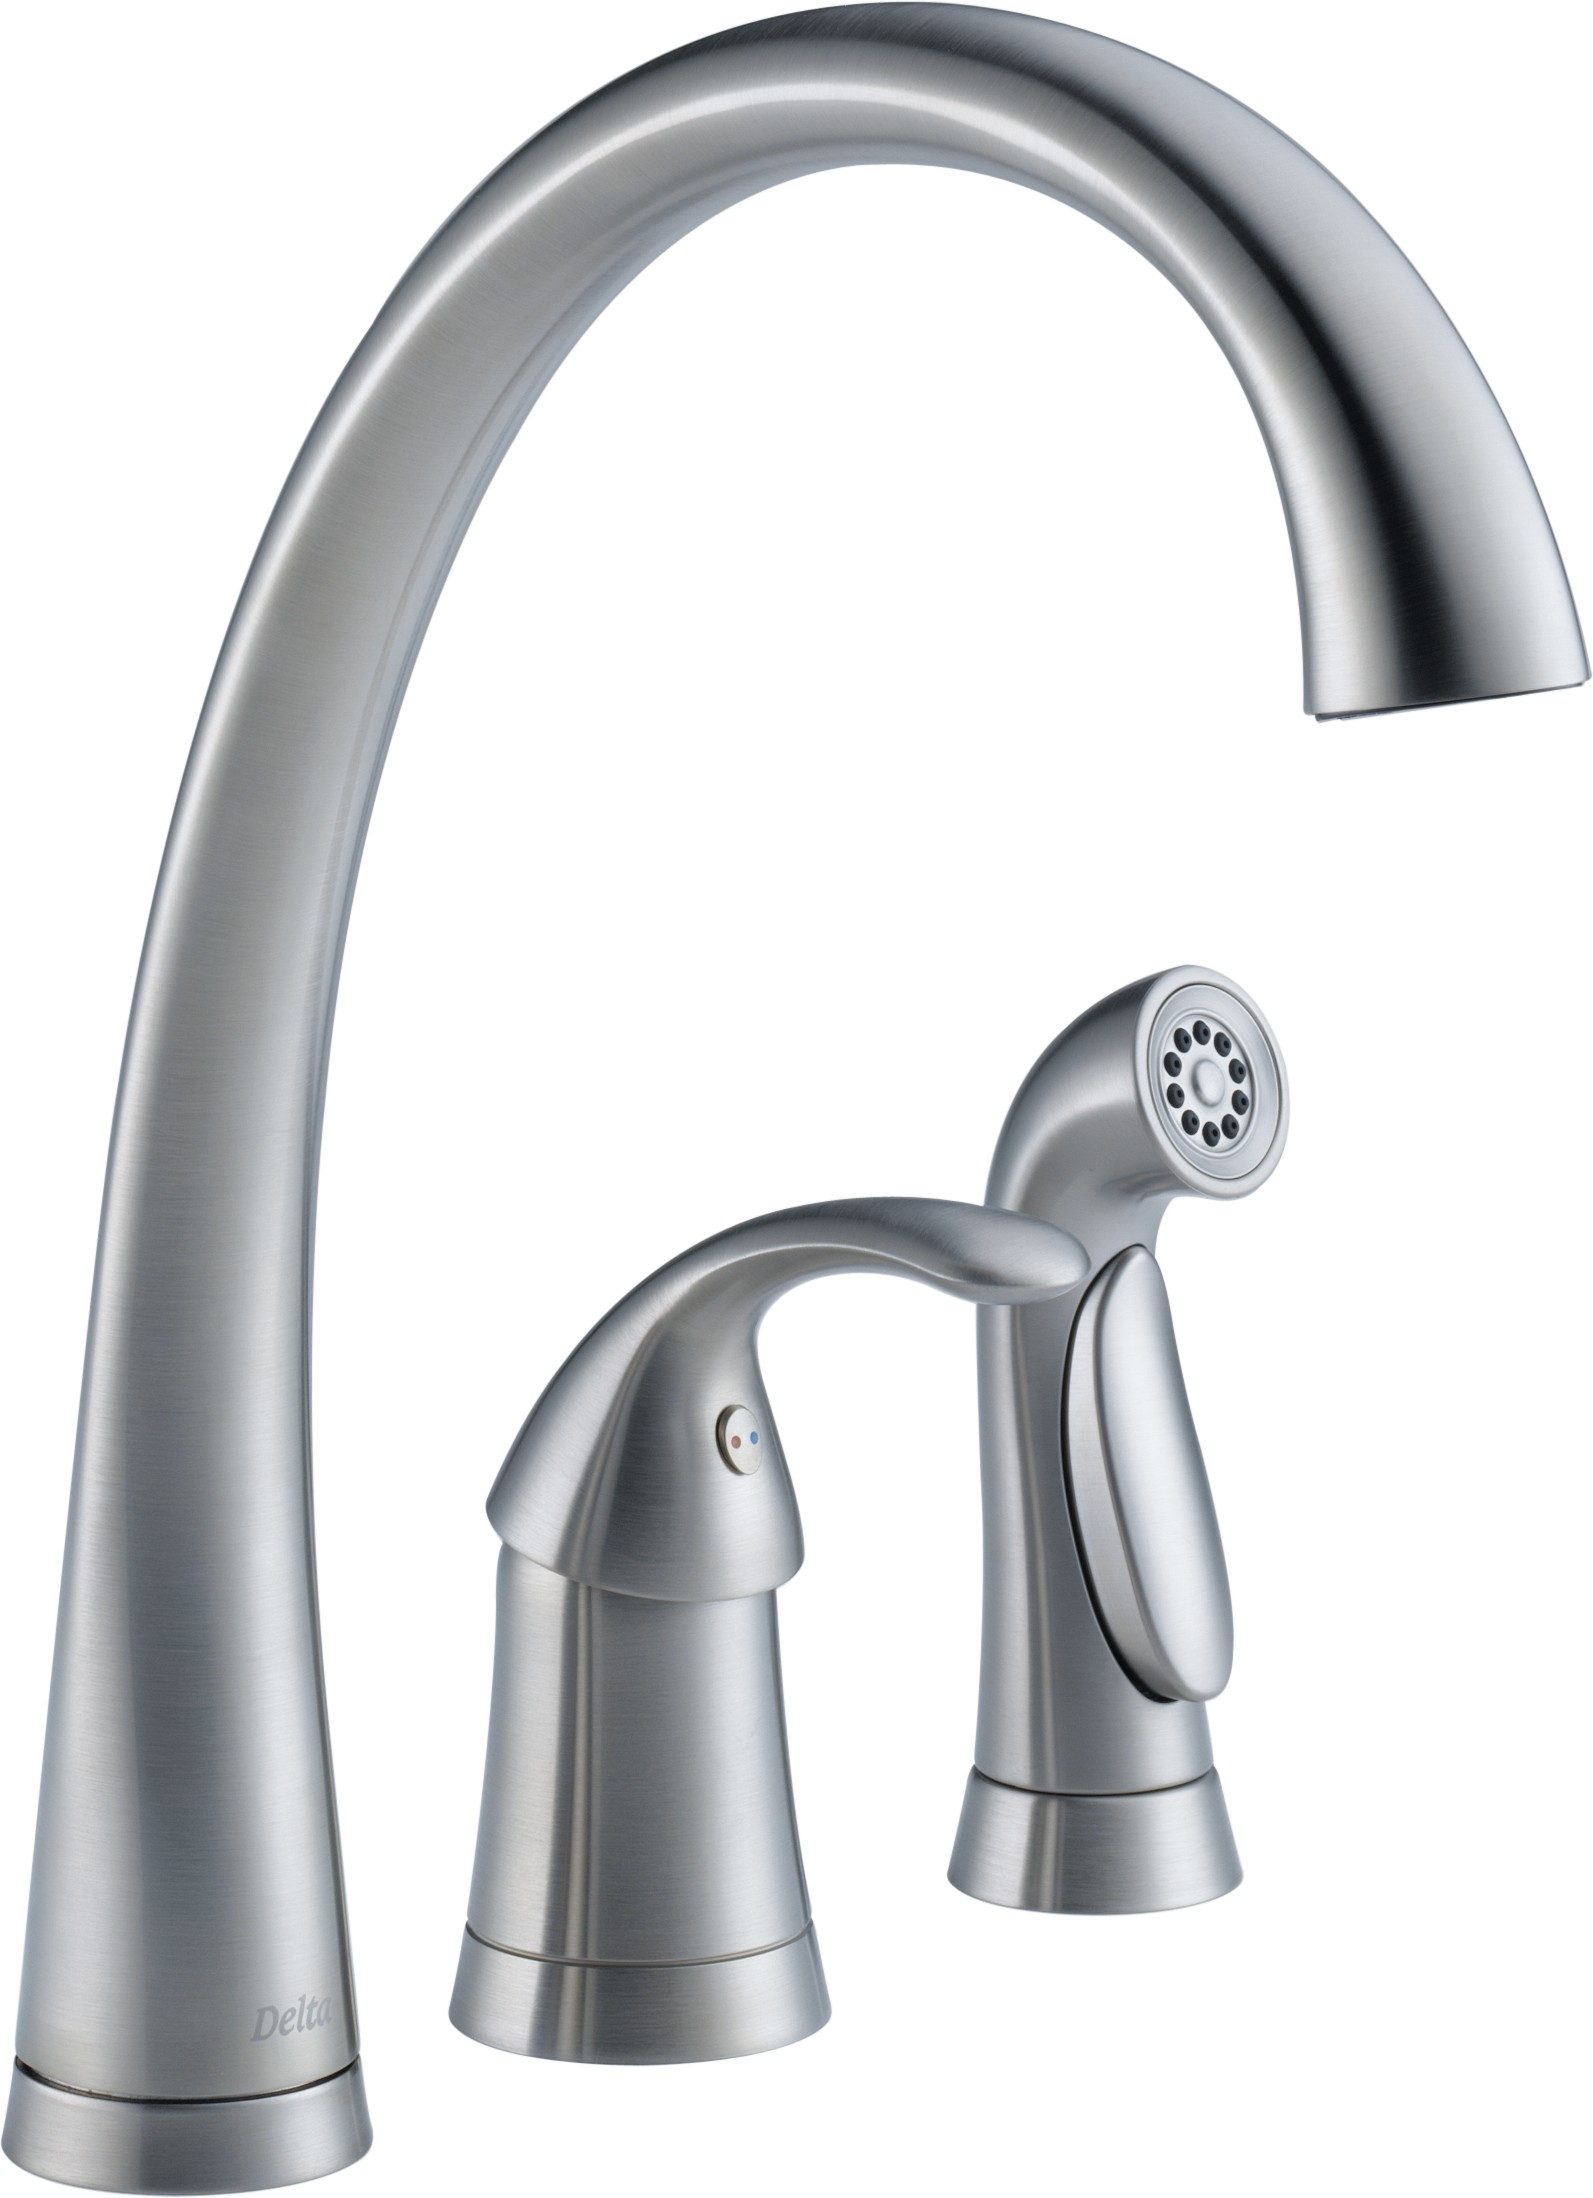 Delta-Delex-Brizo | 4380ARDST | DELTA 4380-AR-DST PILAR 1-HANDLE WIDESPREAD KITCHEN FAUCET WITH SIDE SPRAY ARCTIC STAINLESS